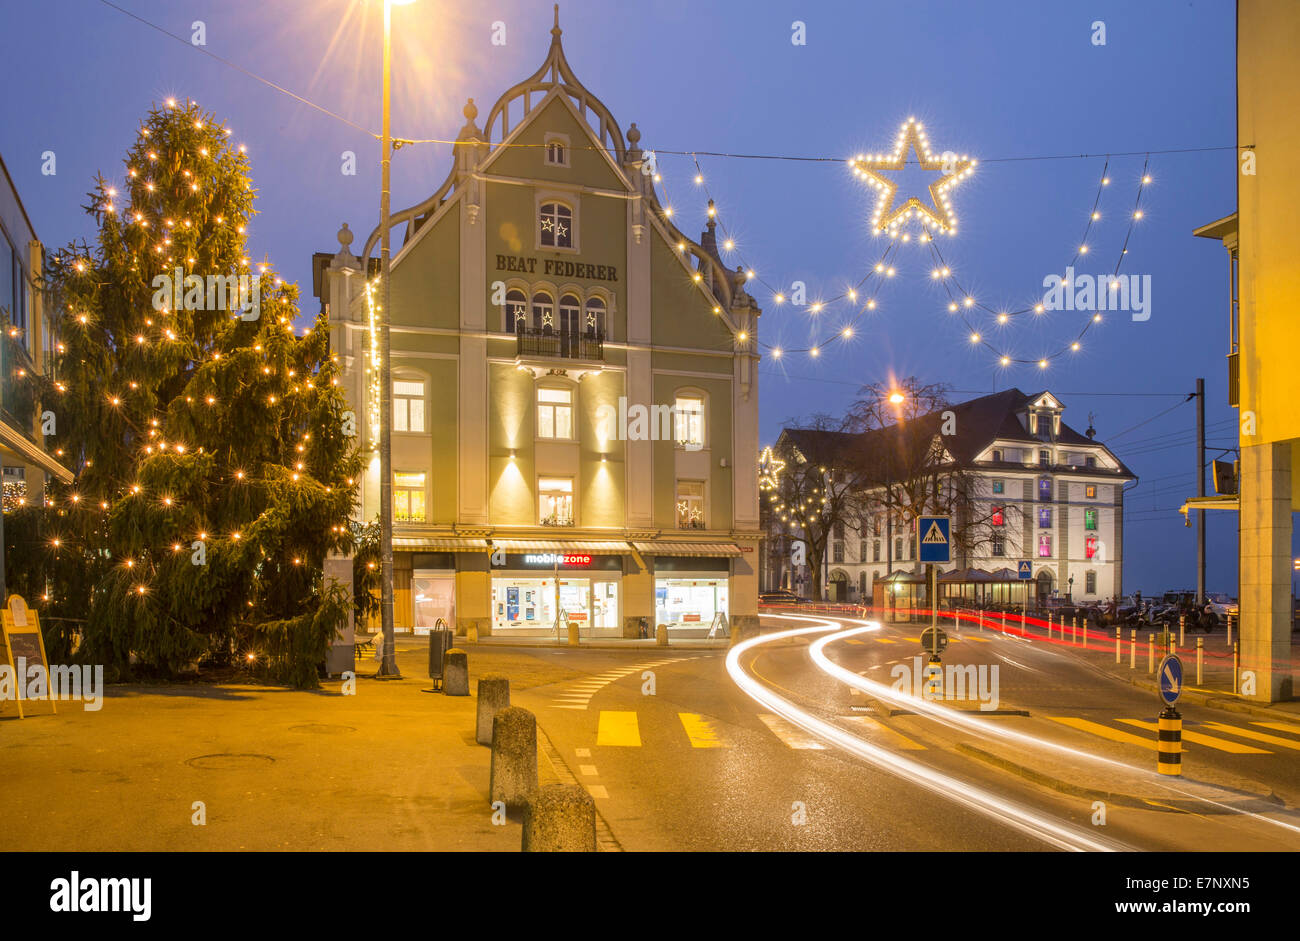 Town, City, Christmas lighting, town, city, Rorschach, Christmas, Advent, town, city, Switzerland, Europe, Stock Photo